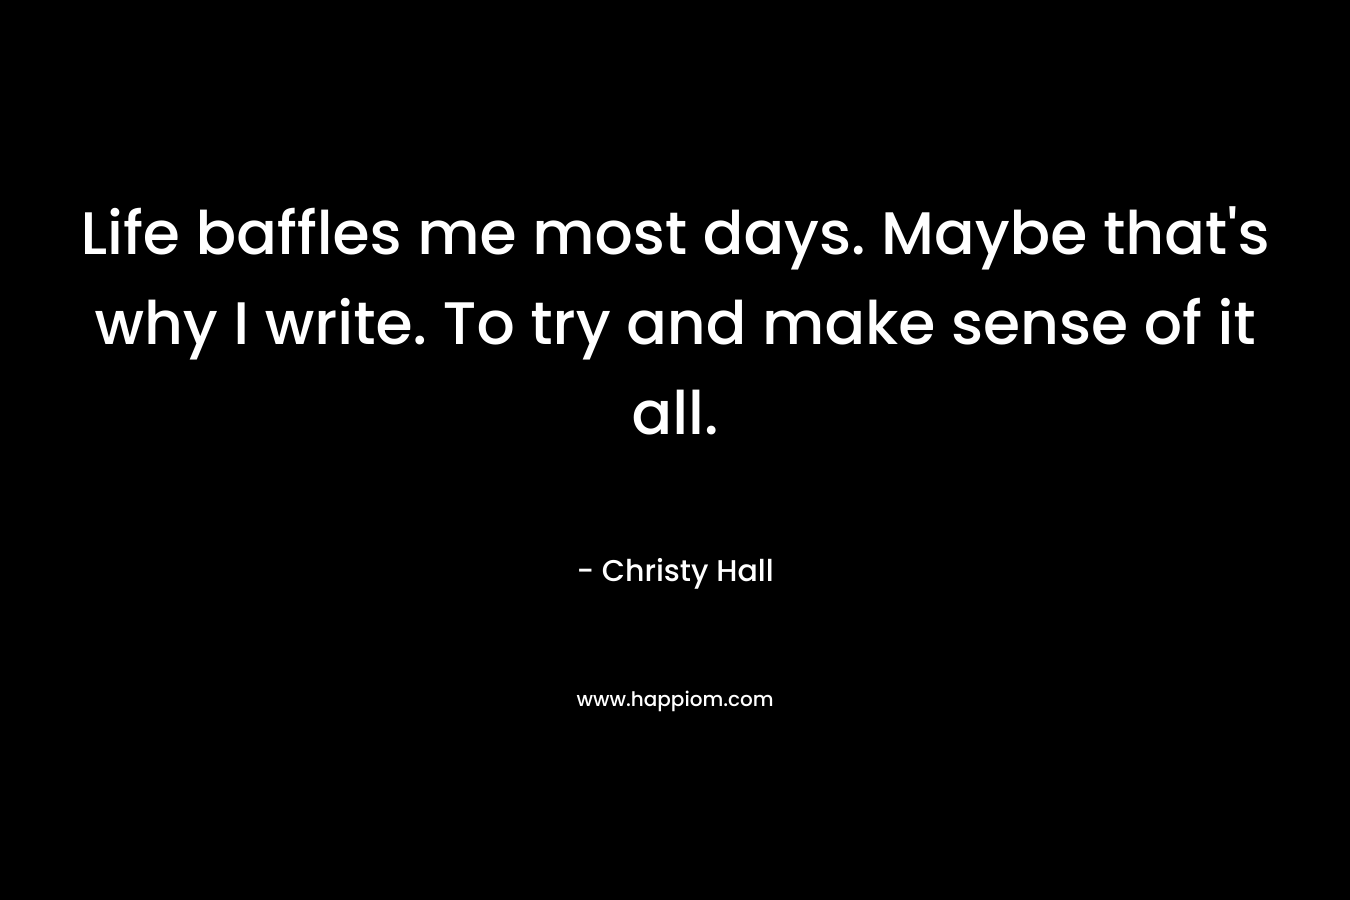 Life baffles me most days. Maybe that's why I write. To try and make sense of it all.